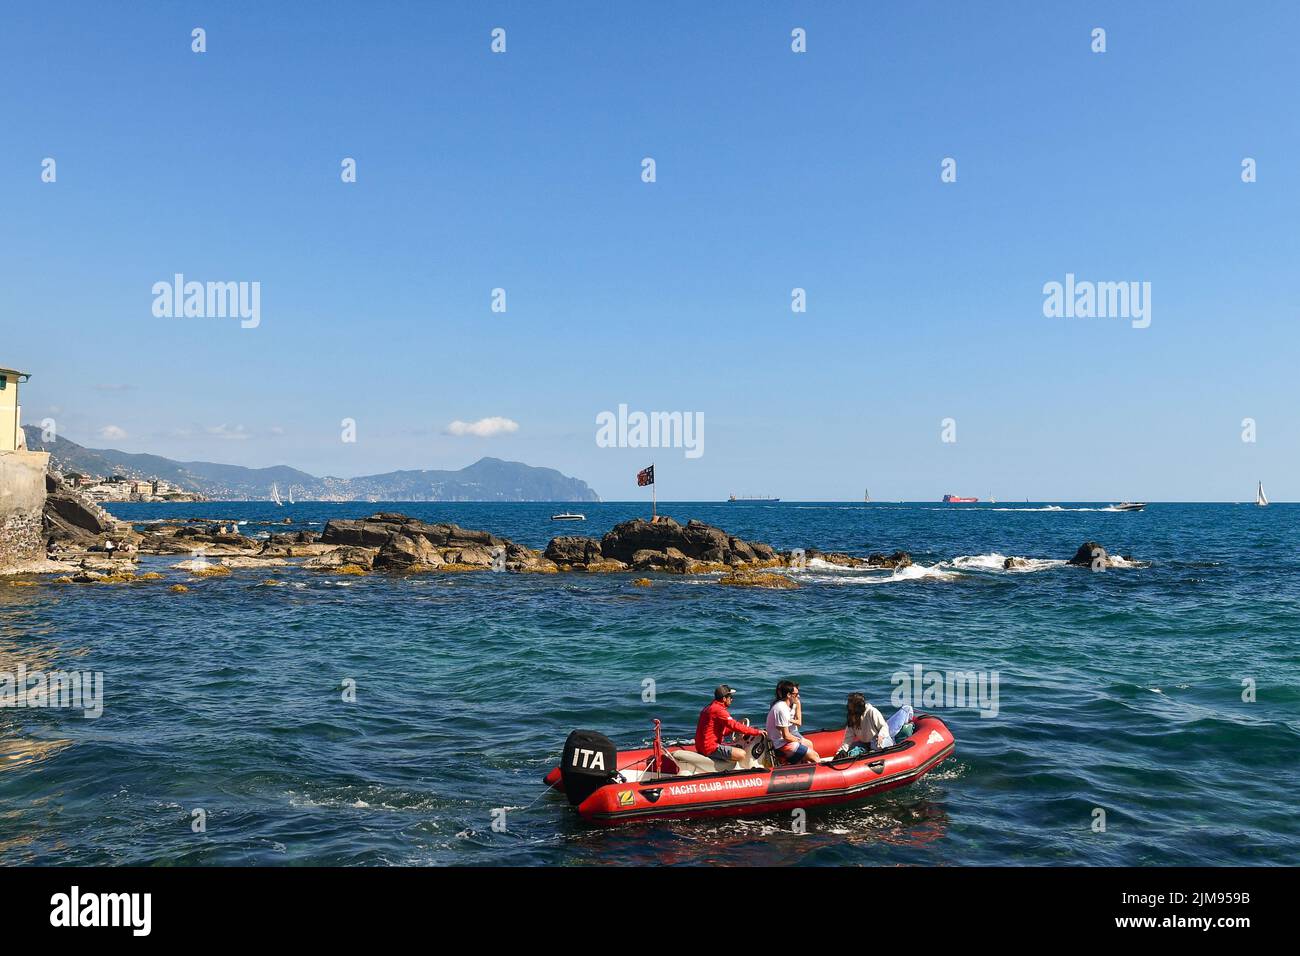 Two young couples sailing on a dinghy with the promontory of Portofino in the background, Boccadasse, Genoa, Liguria, Italy Stock Photo